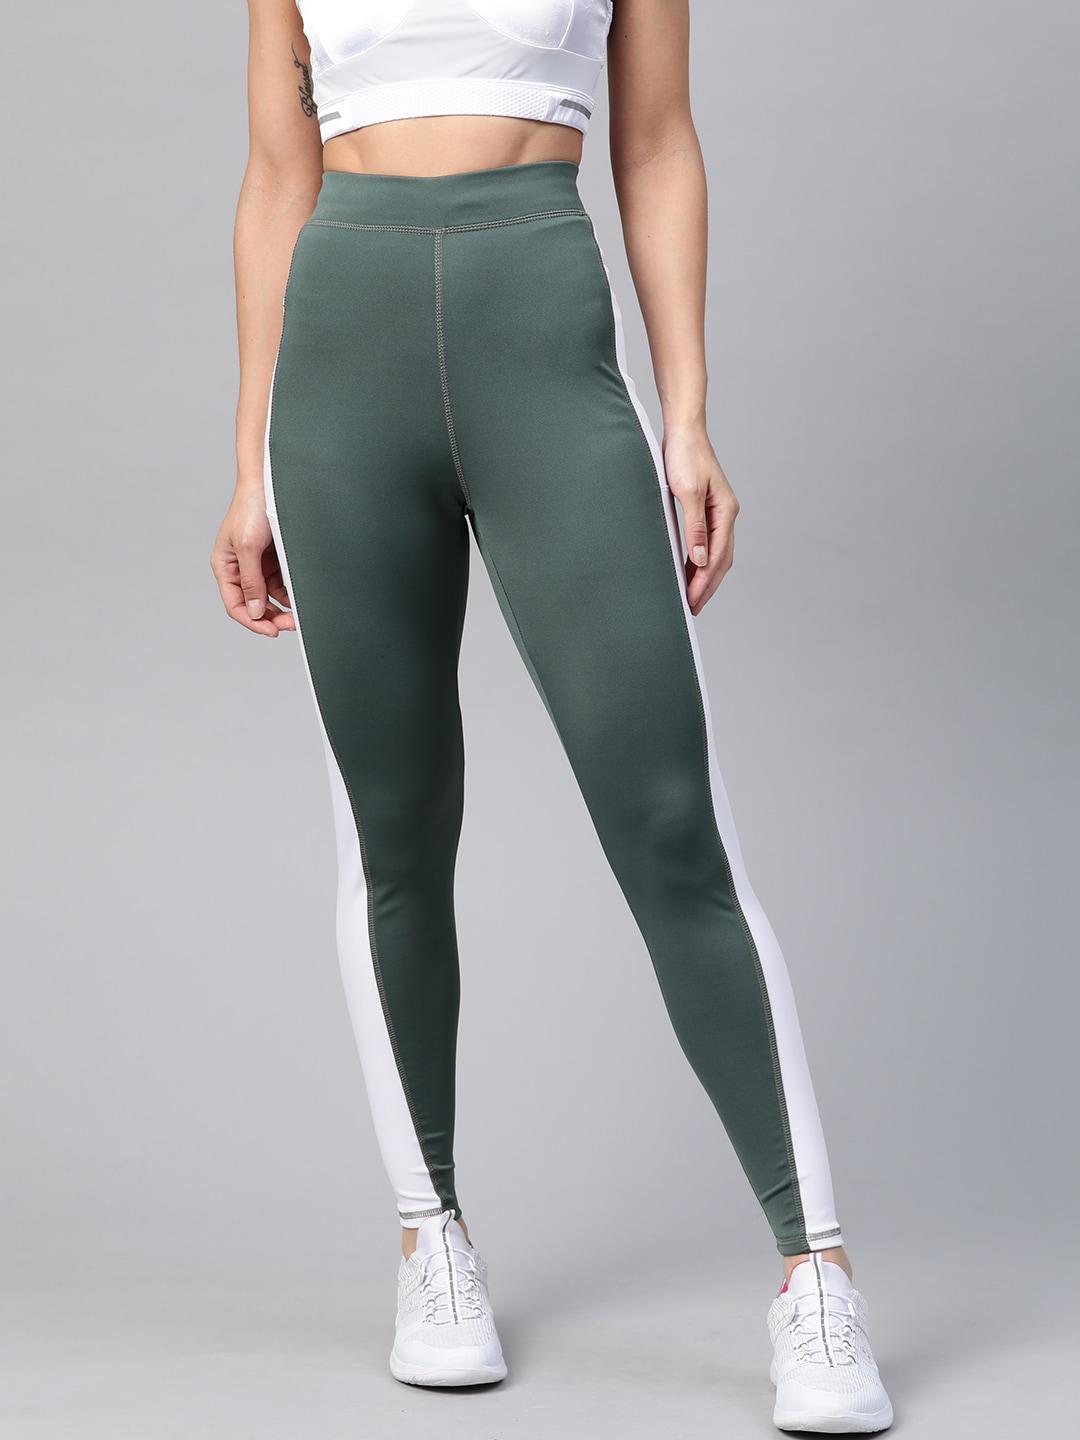 m7-by-metronaut-women-green-&-white-colourblocked-high-rise-solid-training-tights